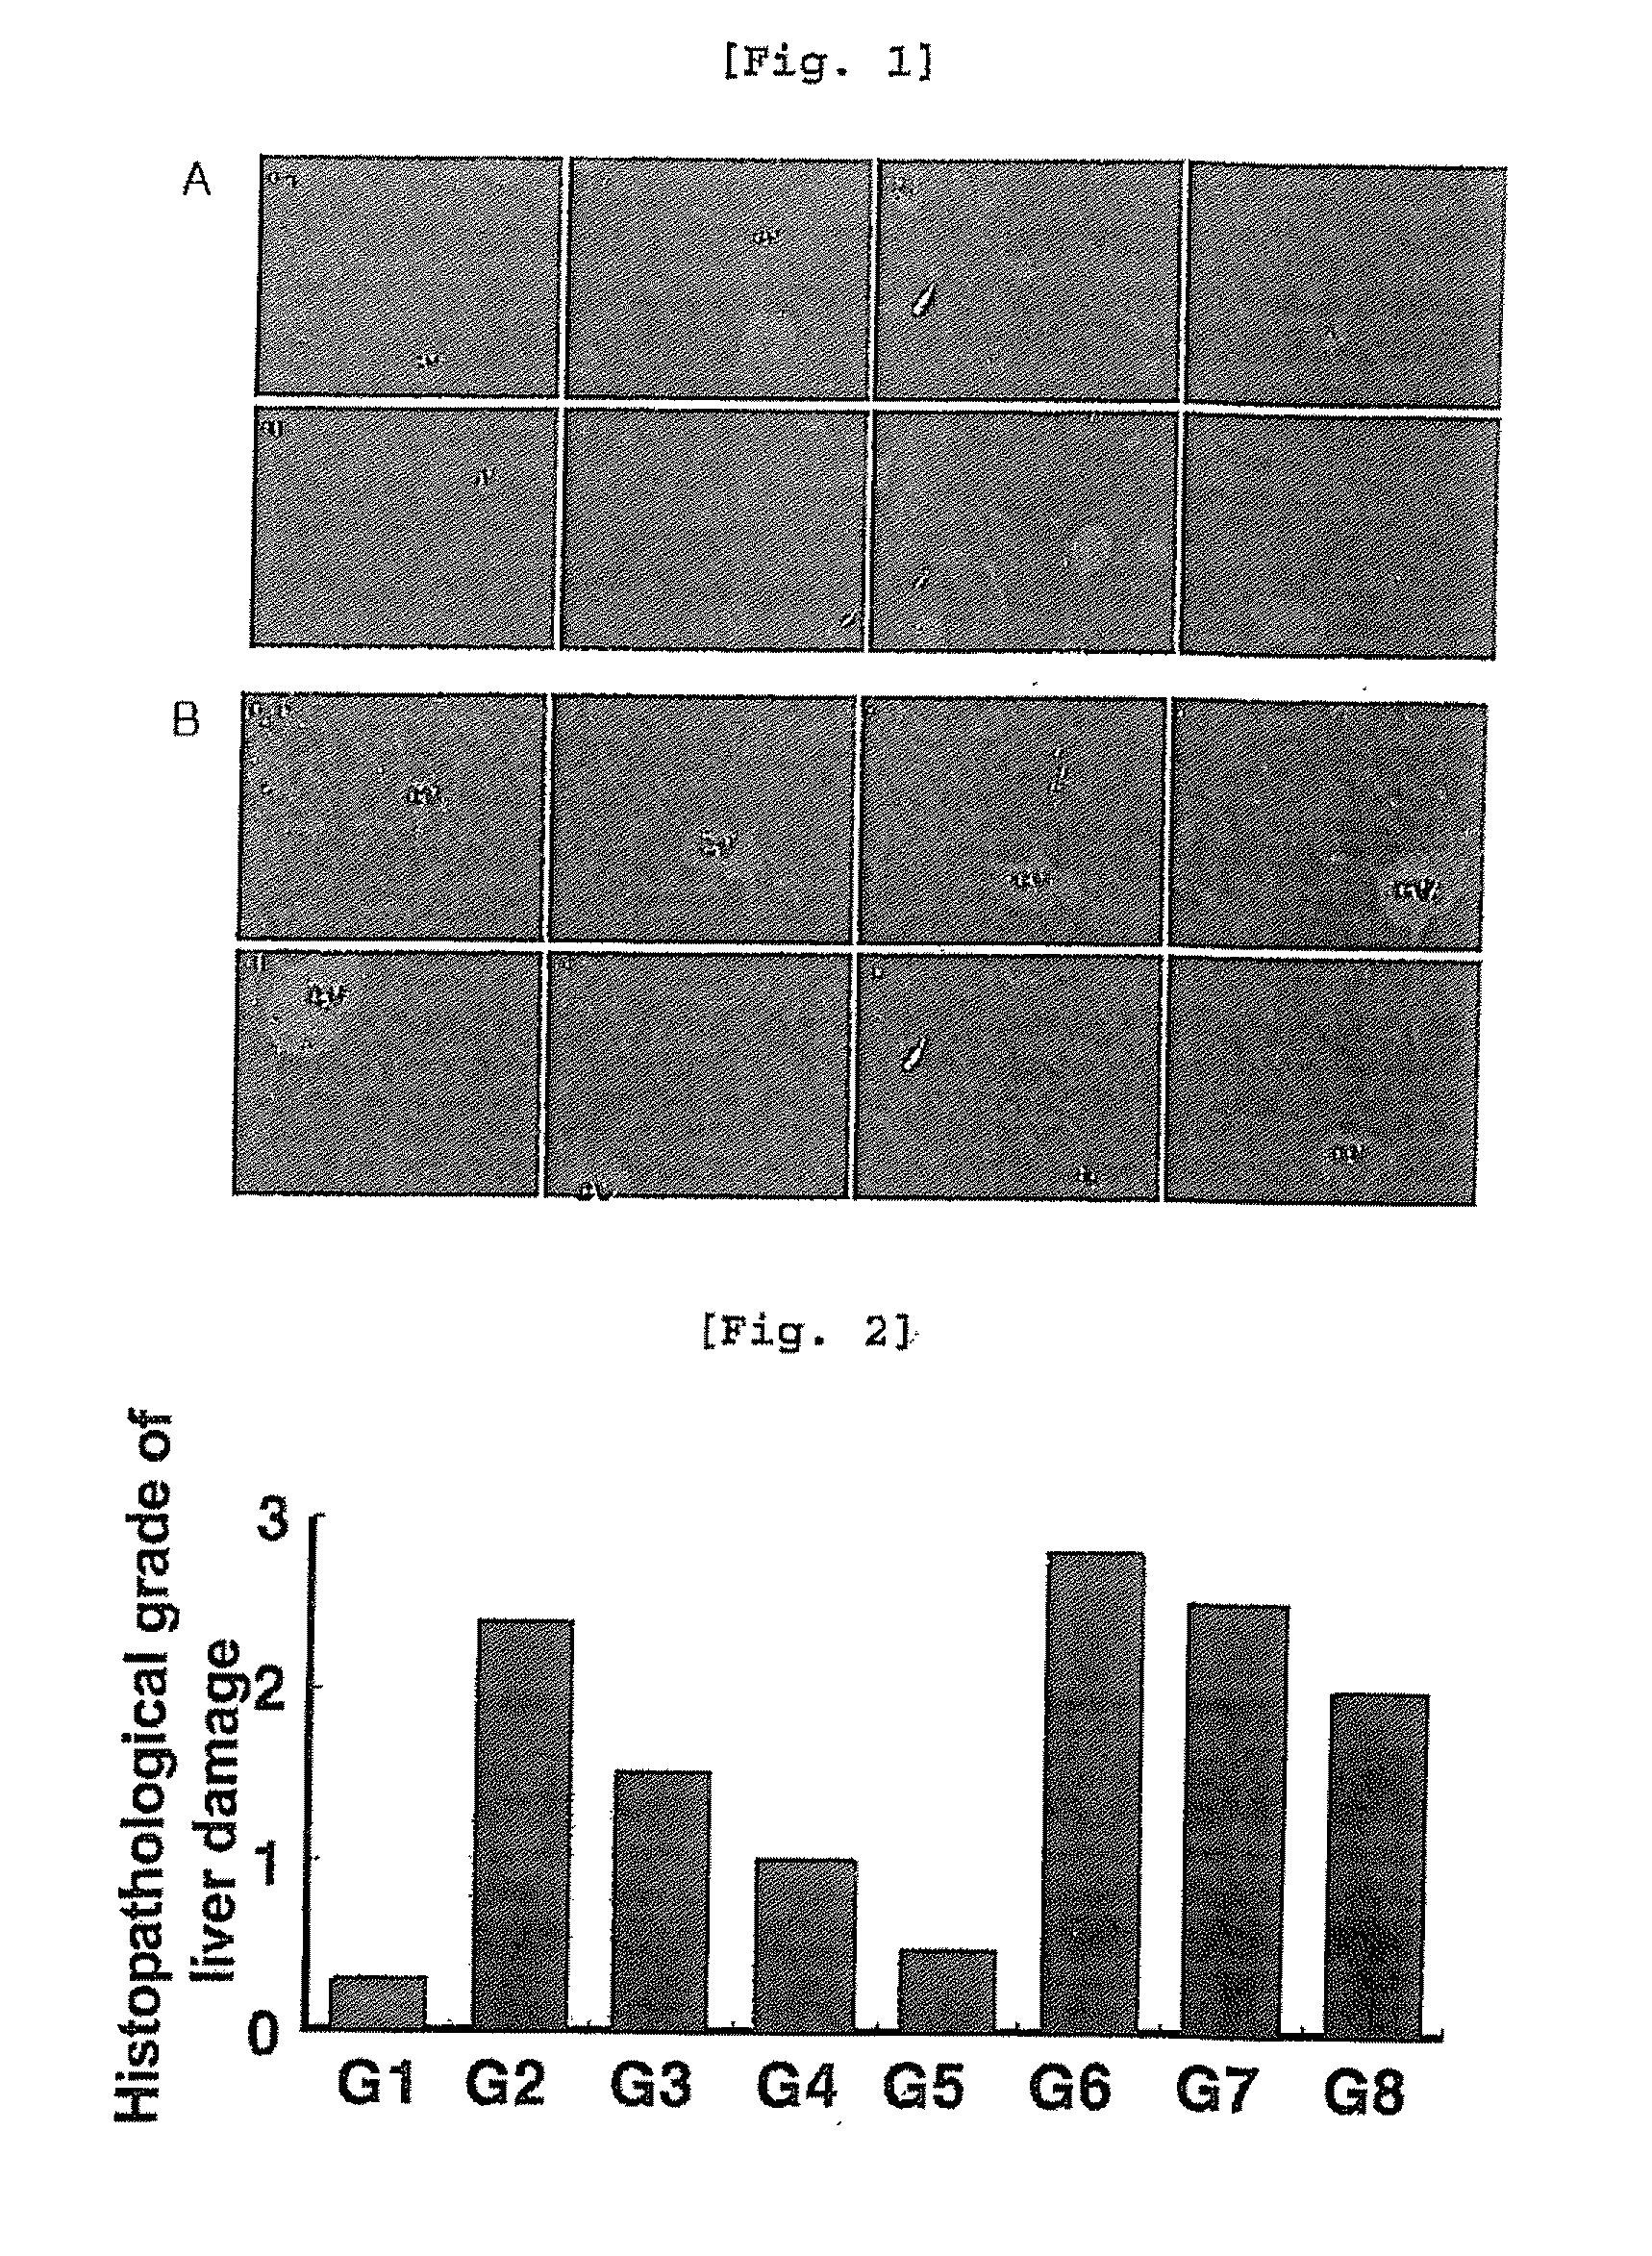 Pharmaceutical composition containing arazyme for the prevention of liver dysfunction